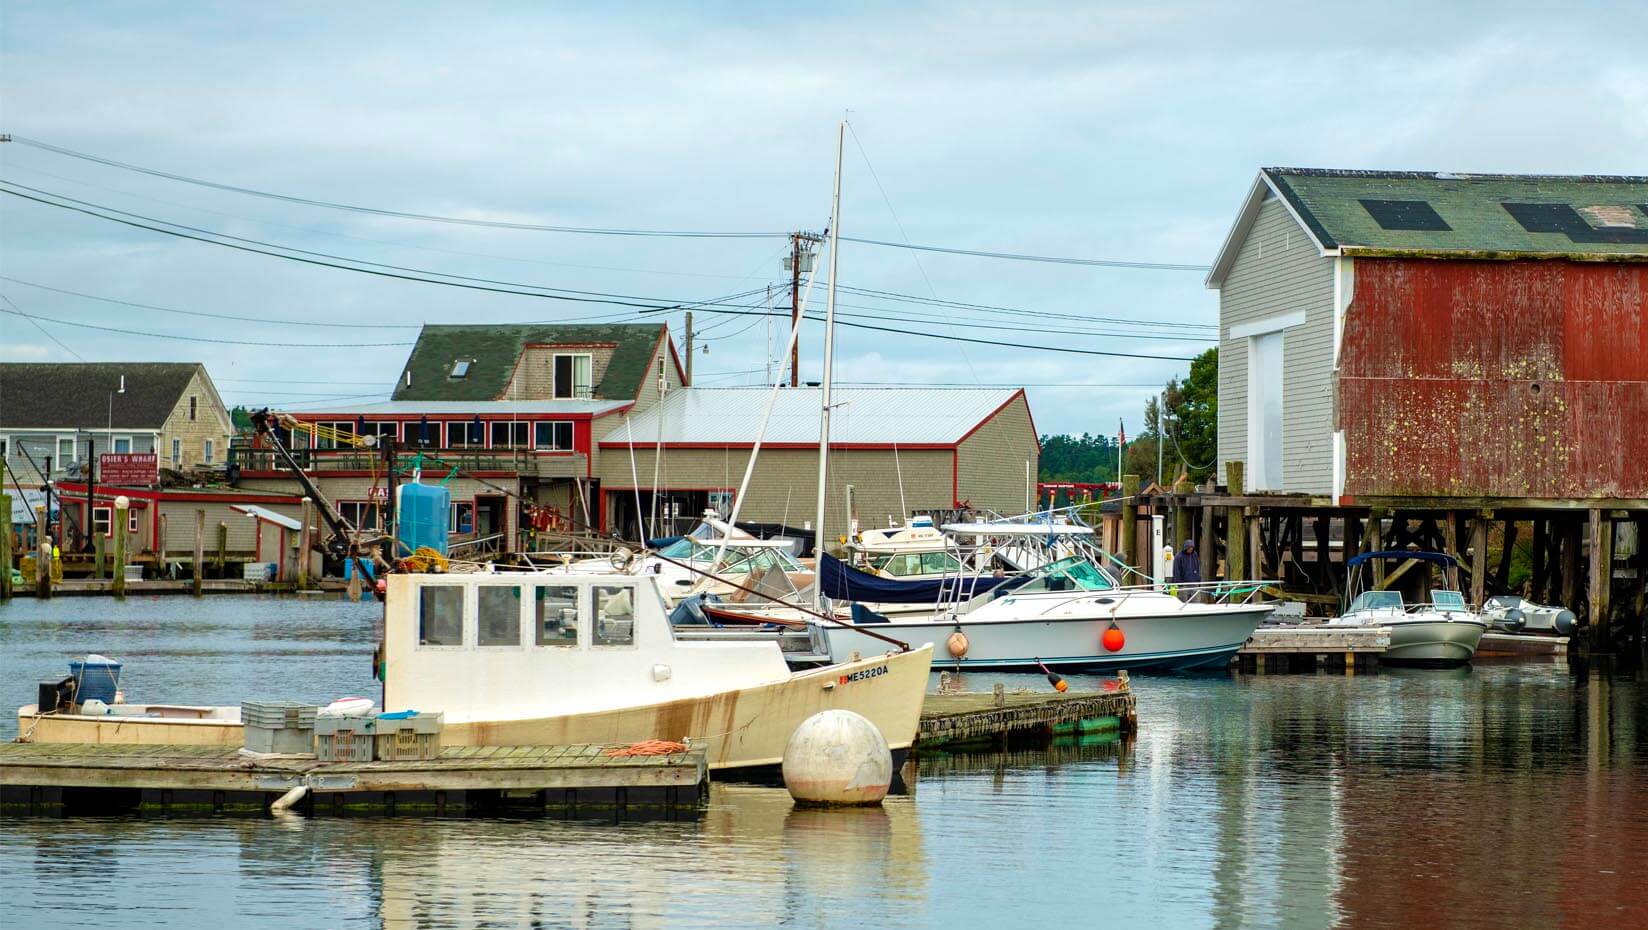 featured image for UMaine expanding support for climate action and resilience throughout Maine coast